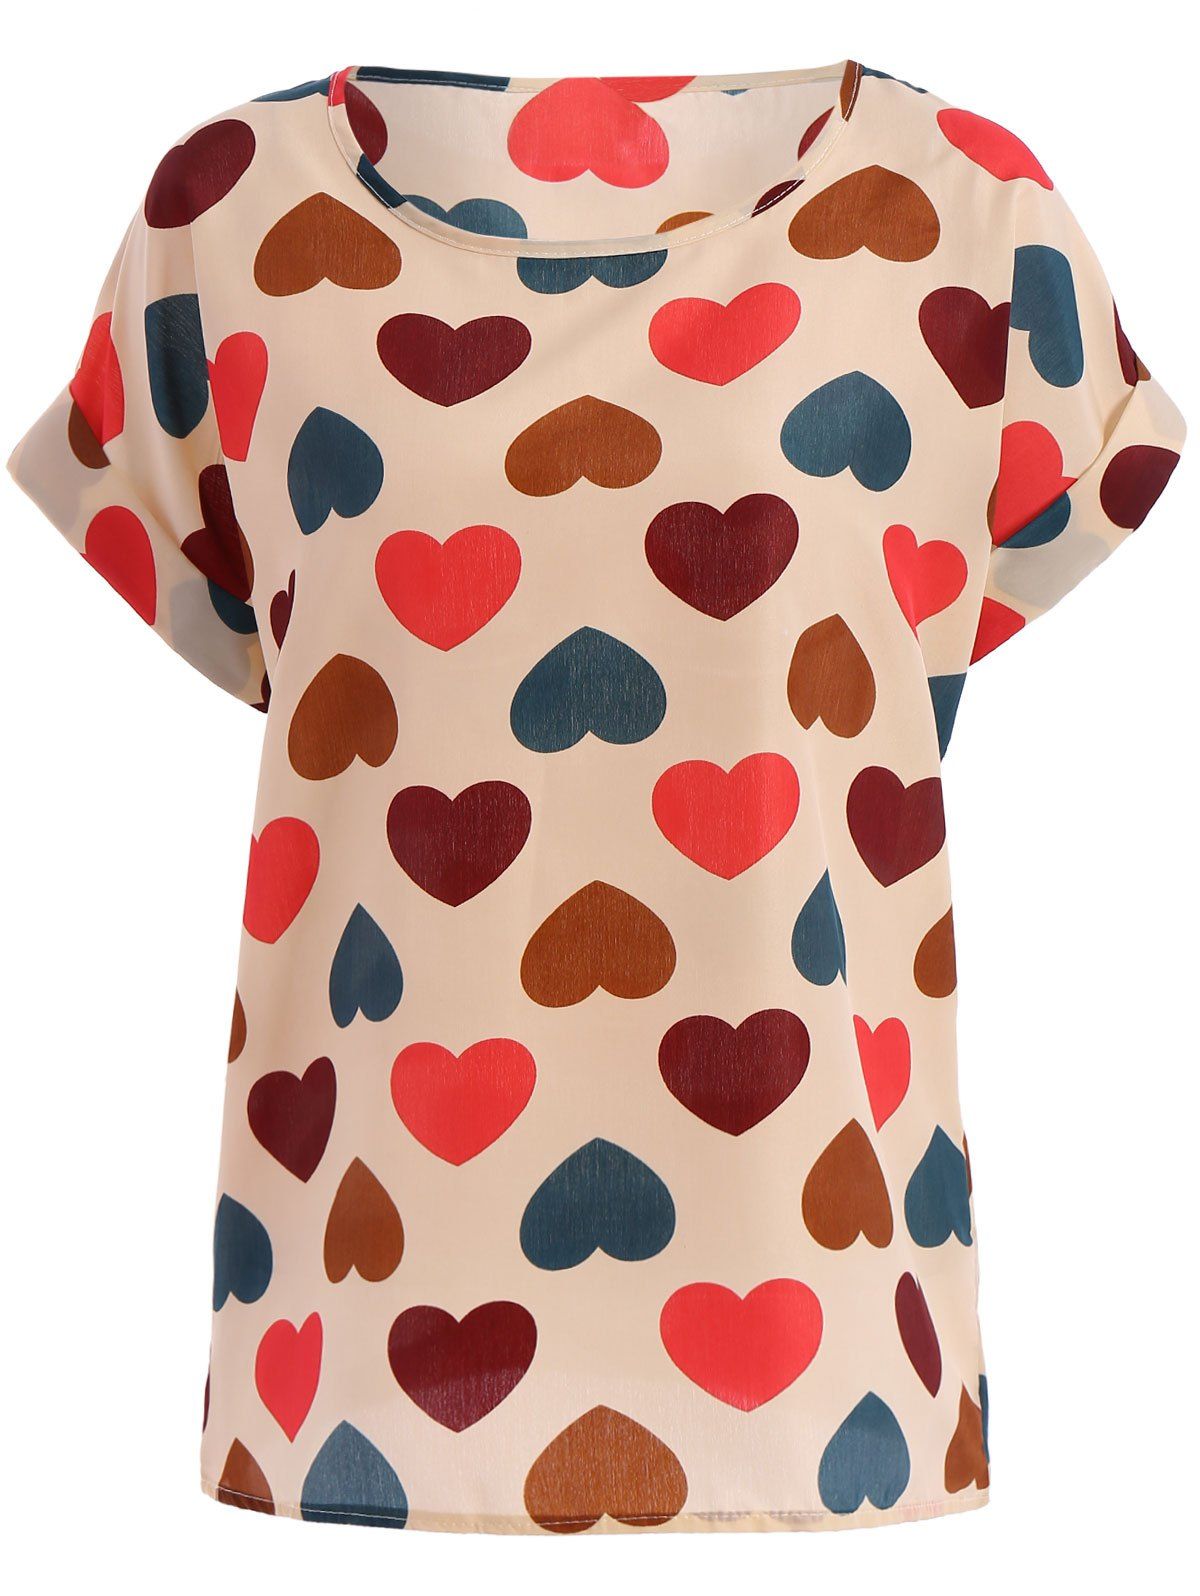 Shops Stylish Plus Size Scoop Neck Colorful Heart Pattern Blouse For Women  